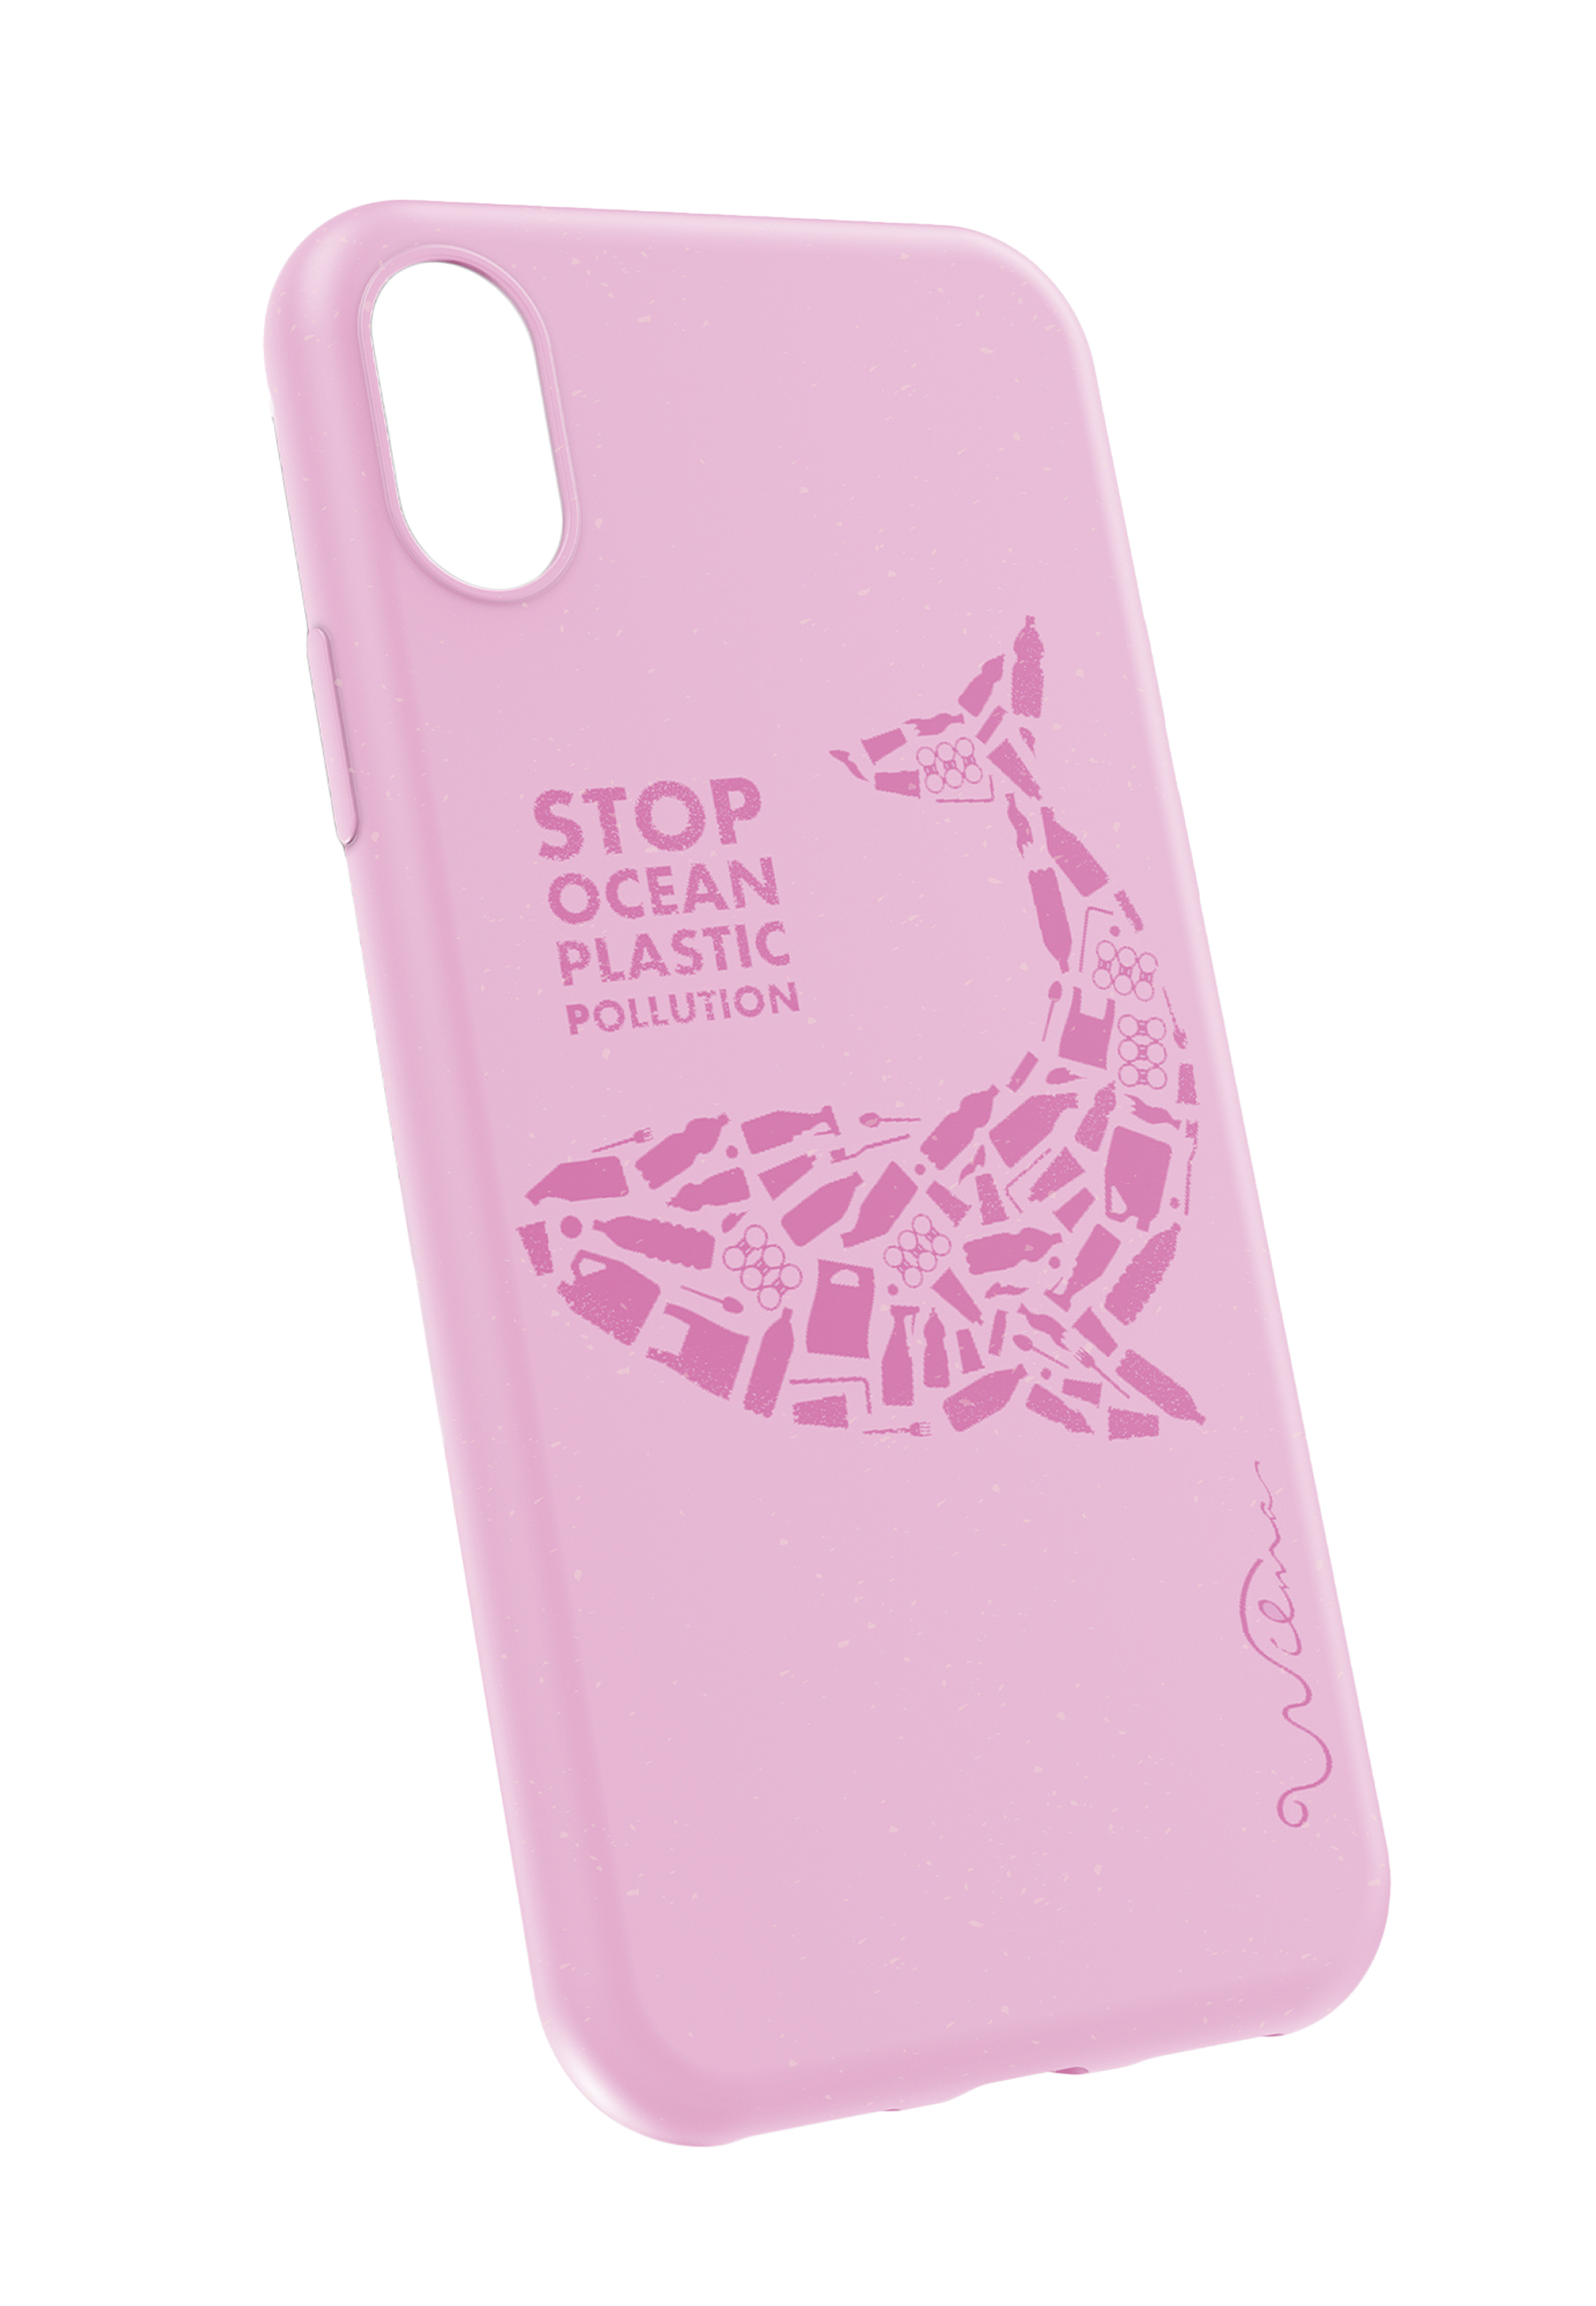 ECO FASHION BY WILMA Apple, Backcover, pink RIPXS, iPhone X/XS